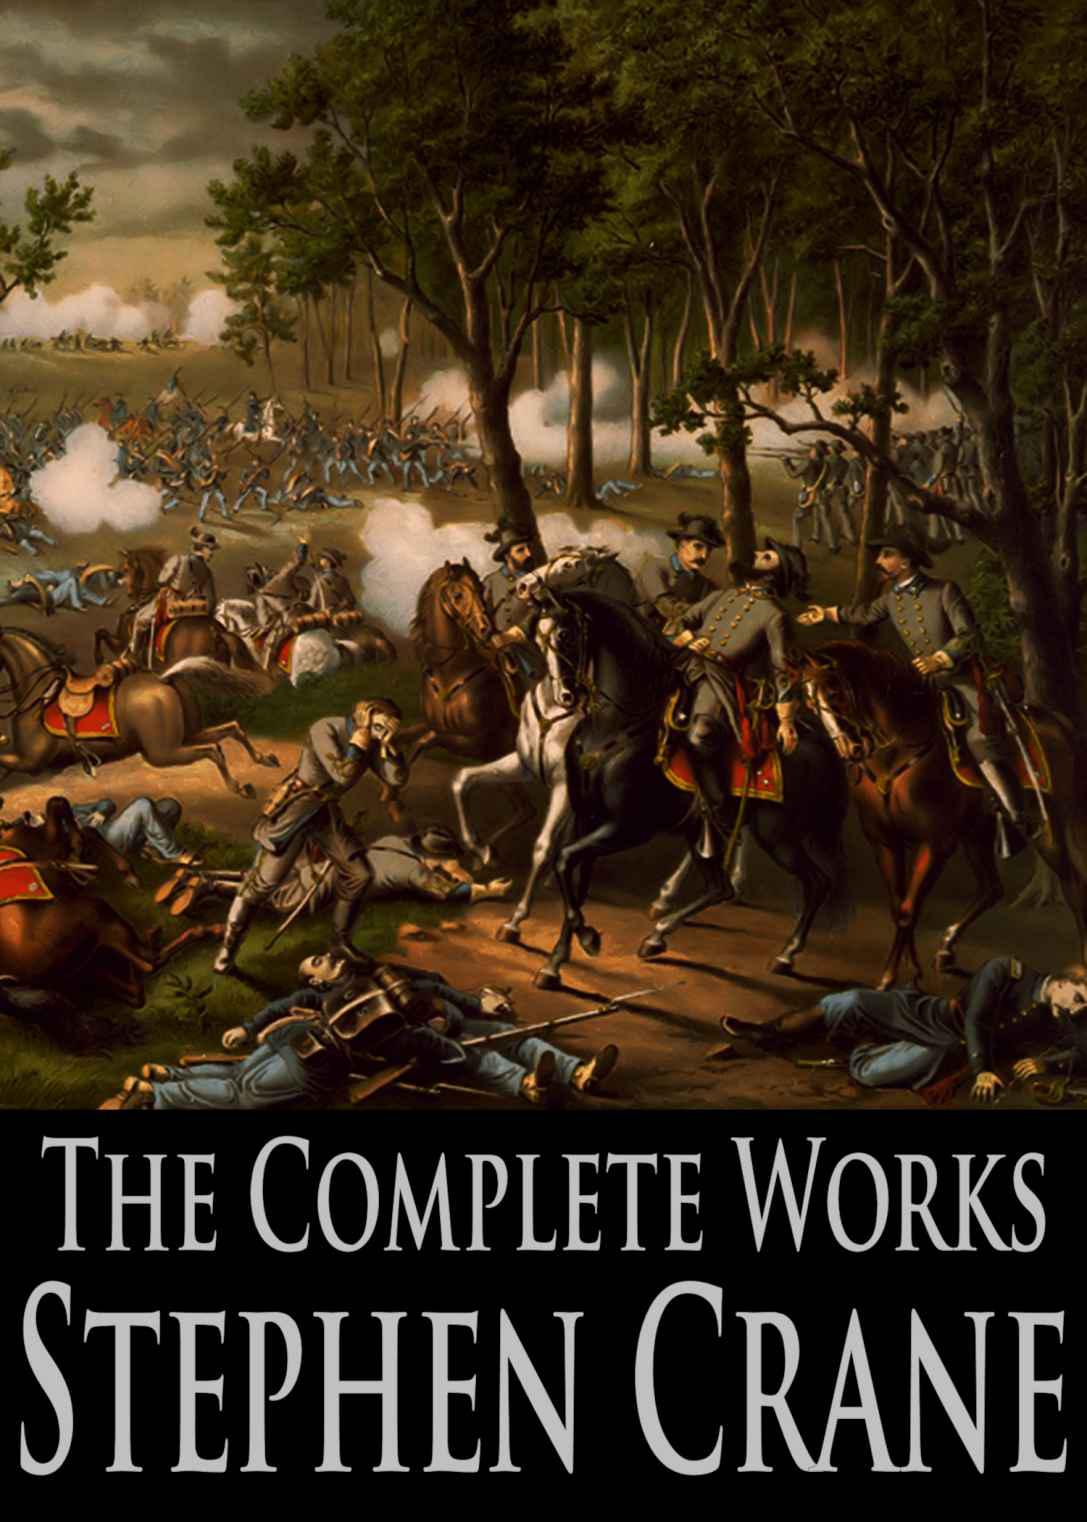 The Complete Works of Stephen Crane